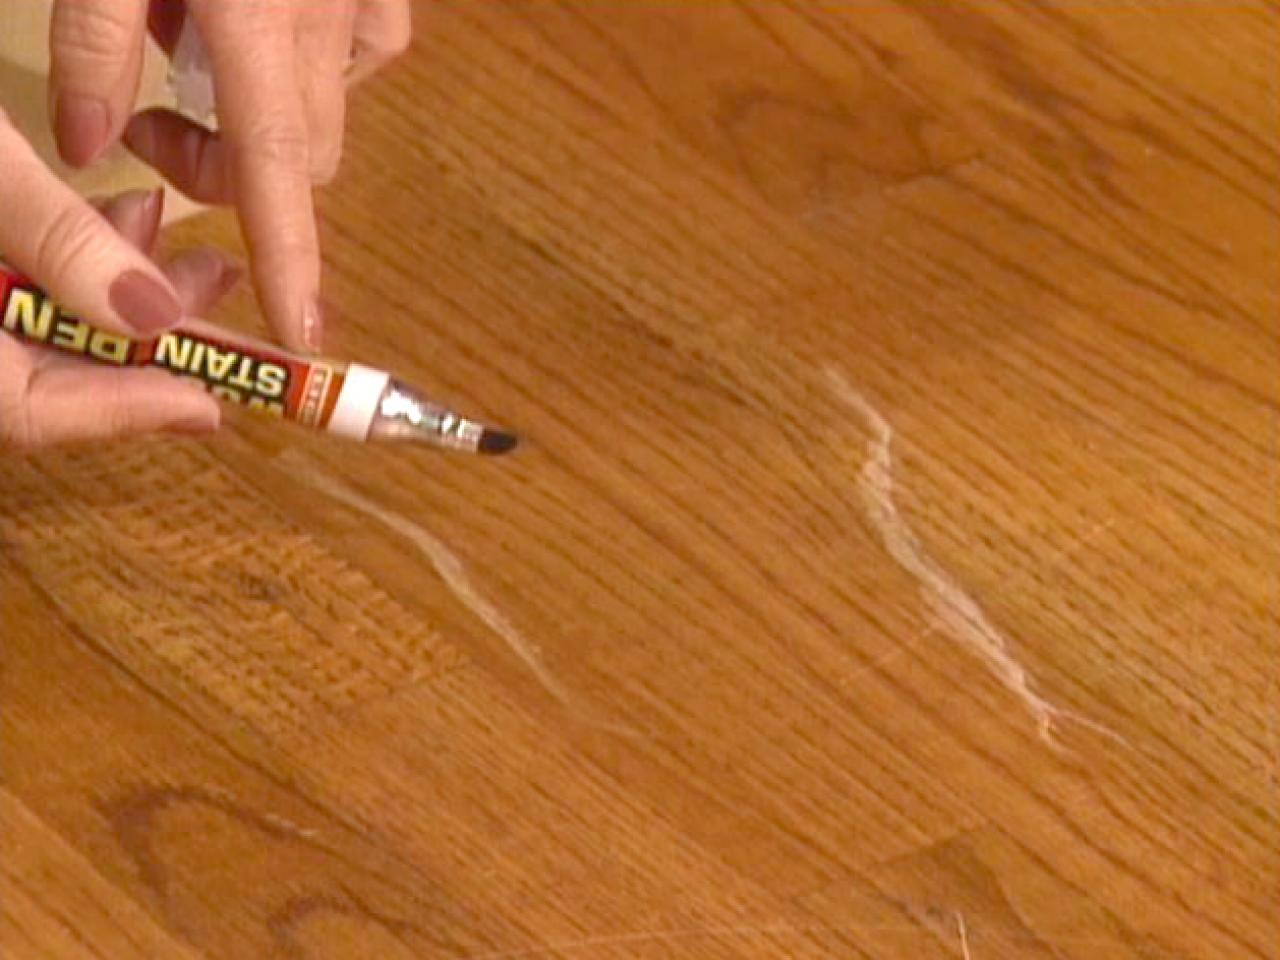 How To Touch Up Wood Floors Tos Diy, White Scuff Marks On Hardwood Floors